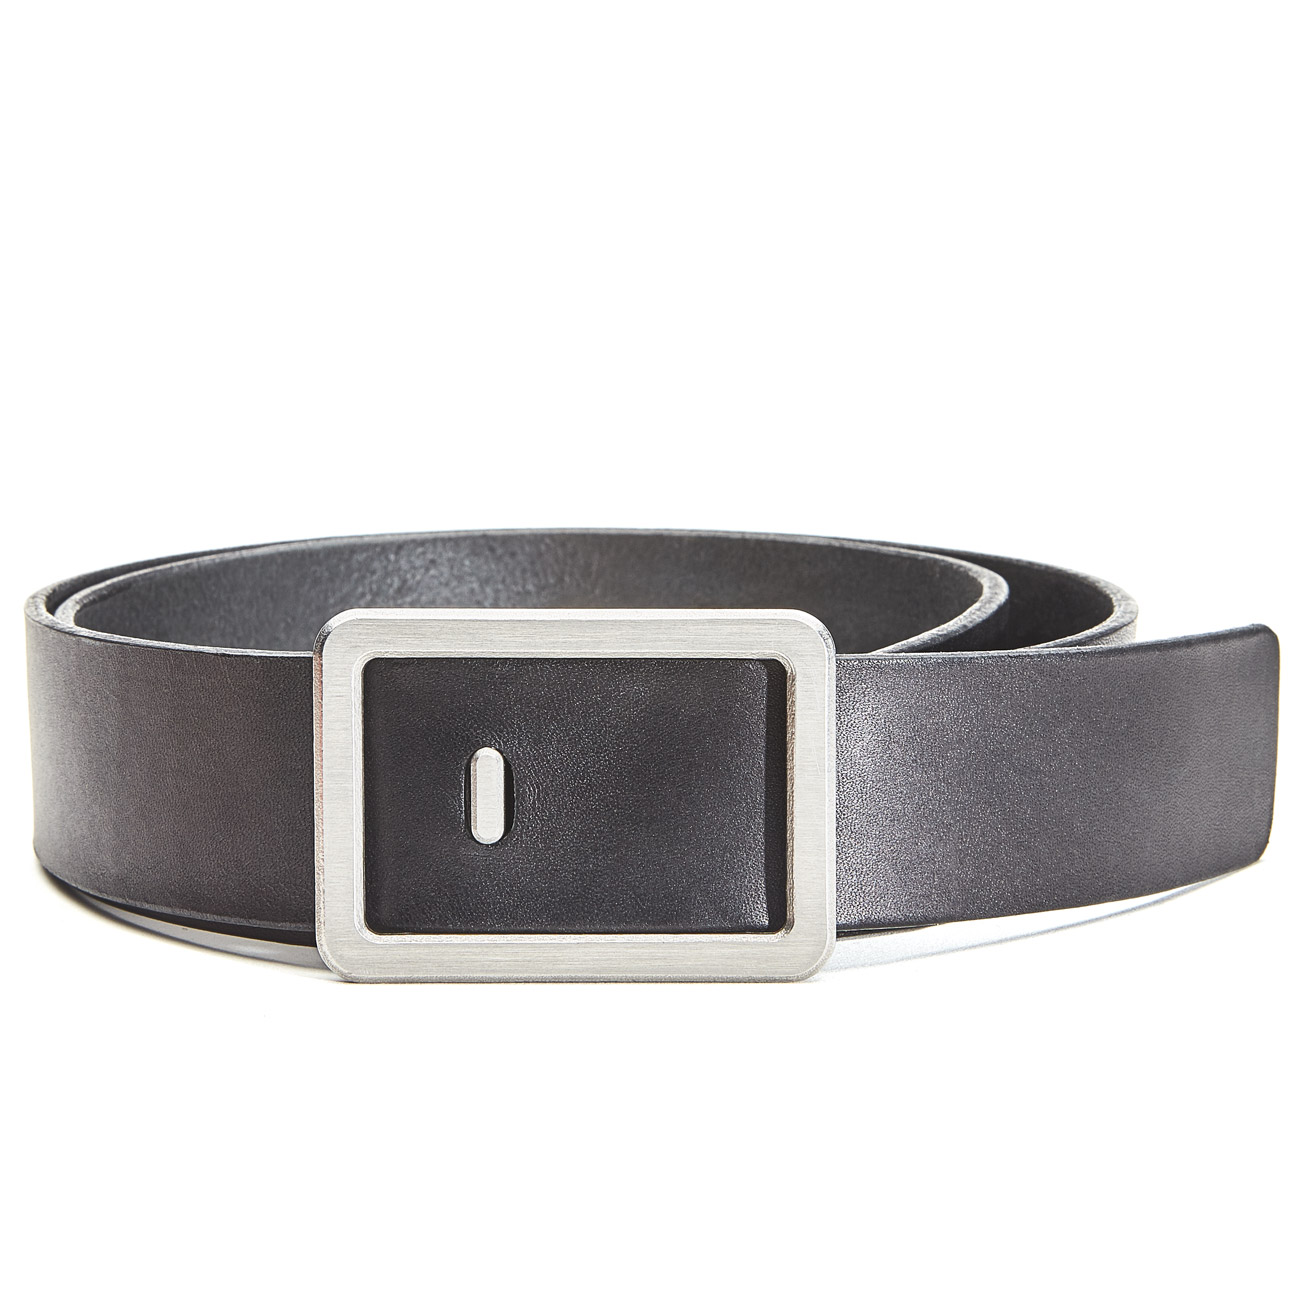 Minimalist Black Belt Solid Stainless Steel Silver Buckle and Leather Strap